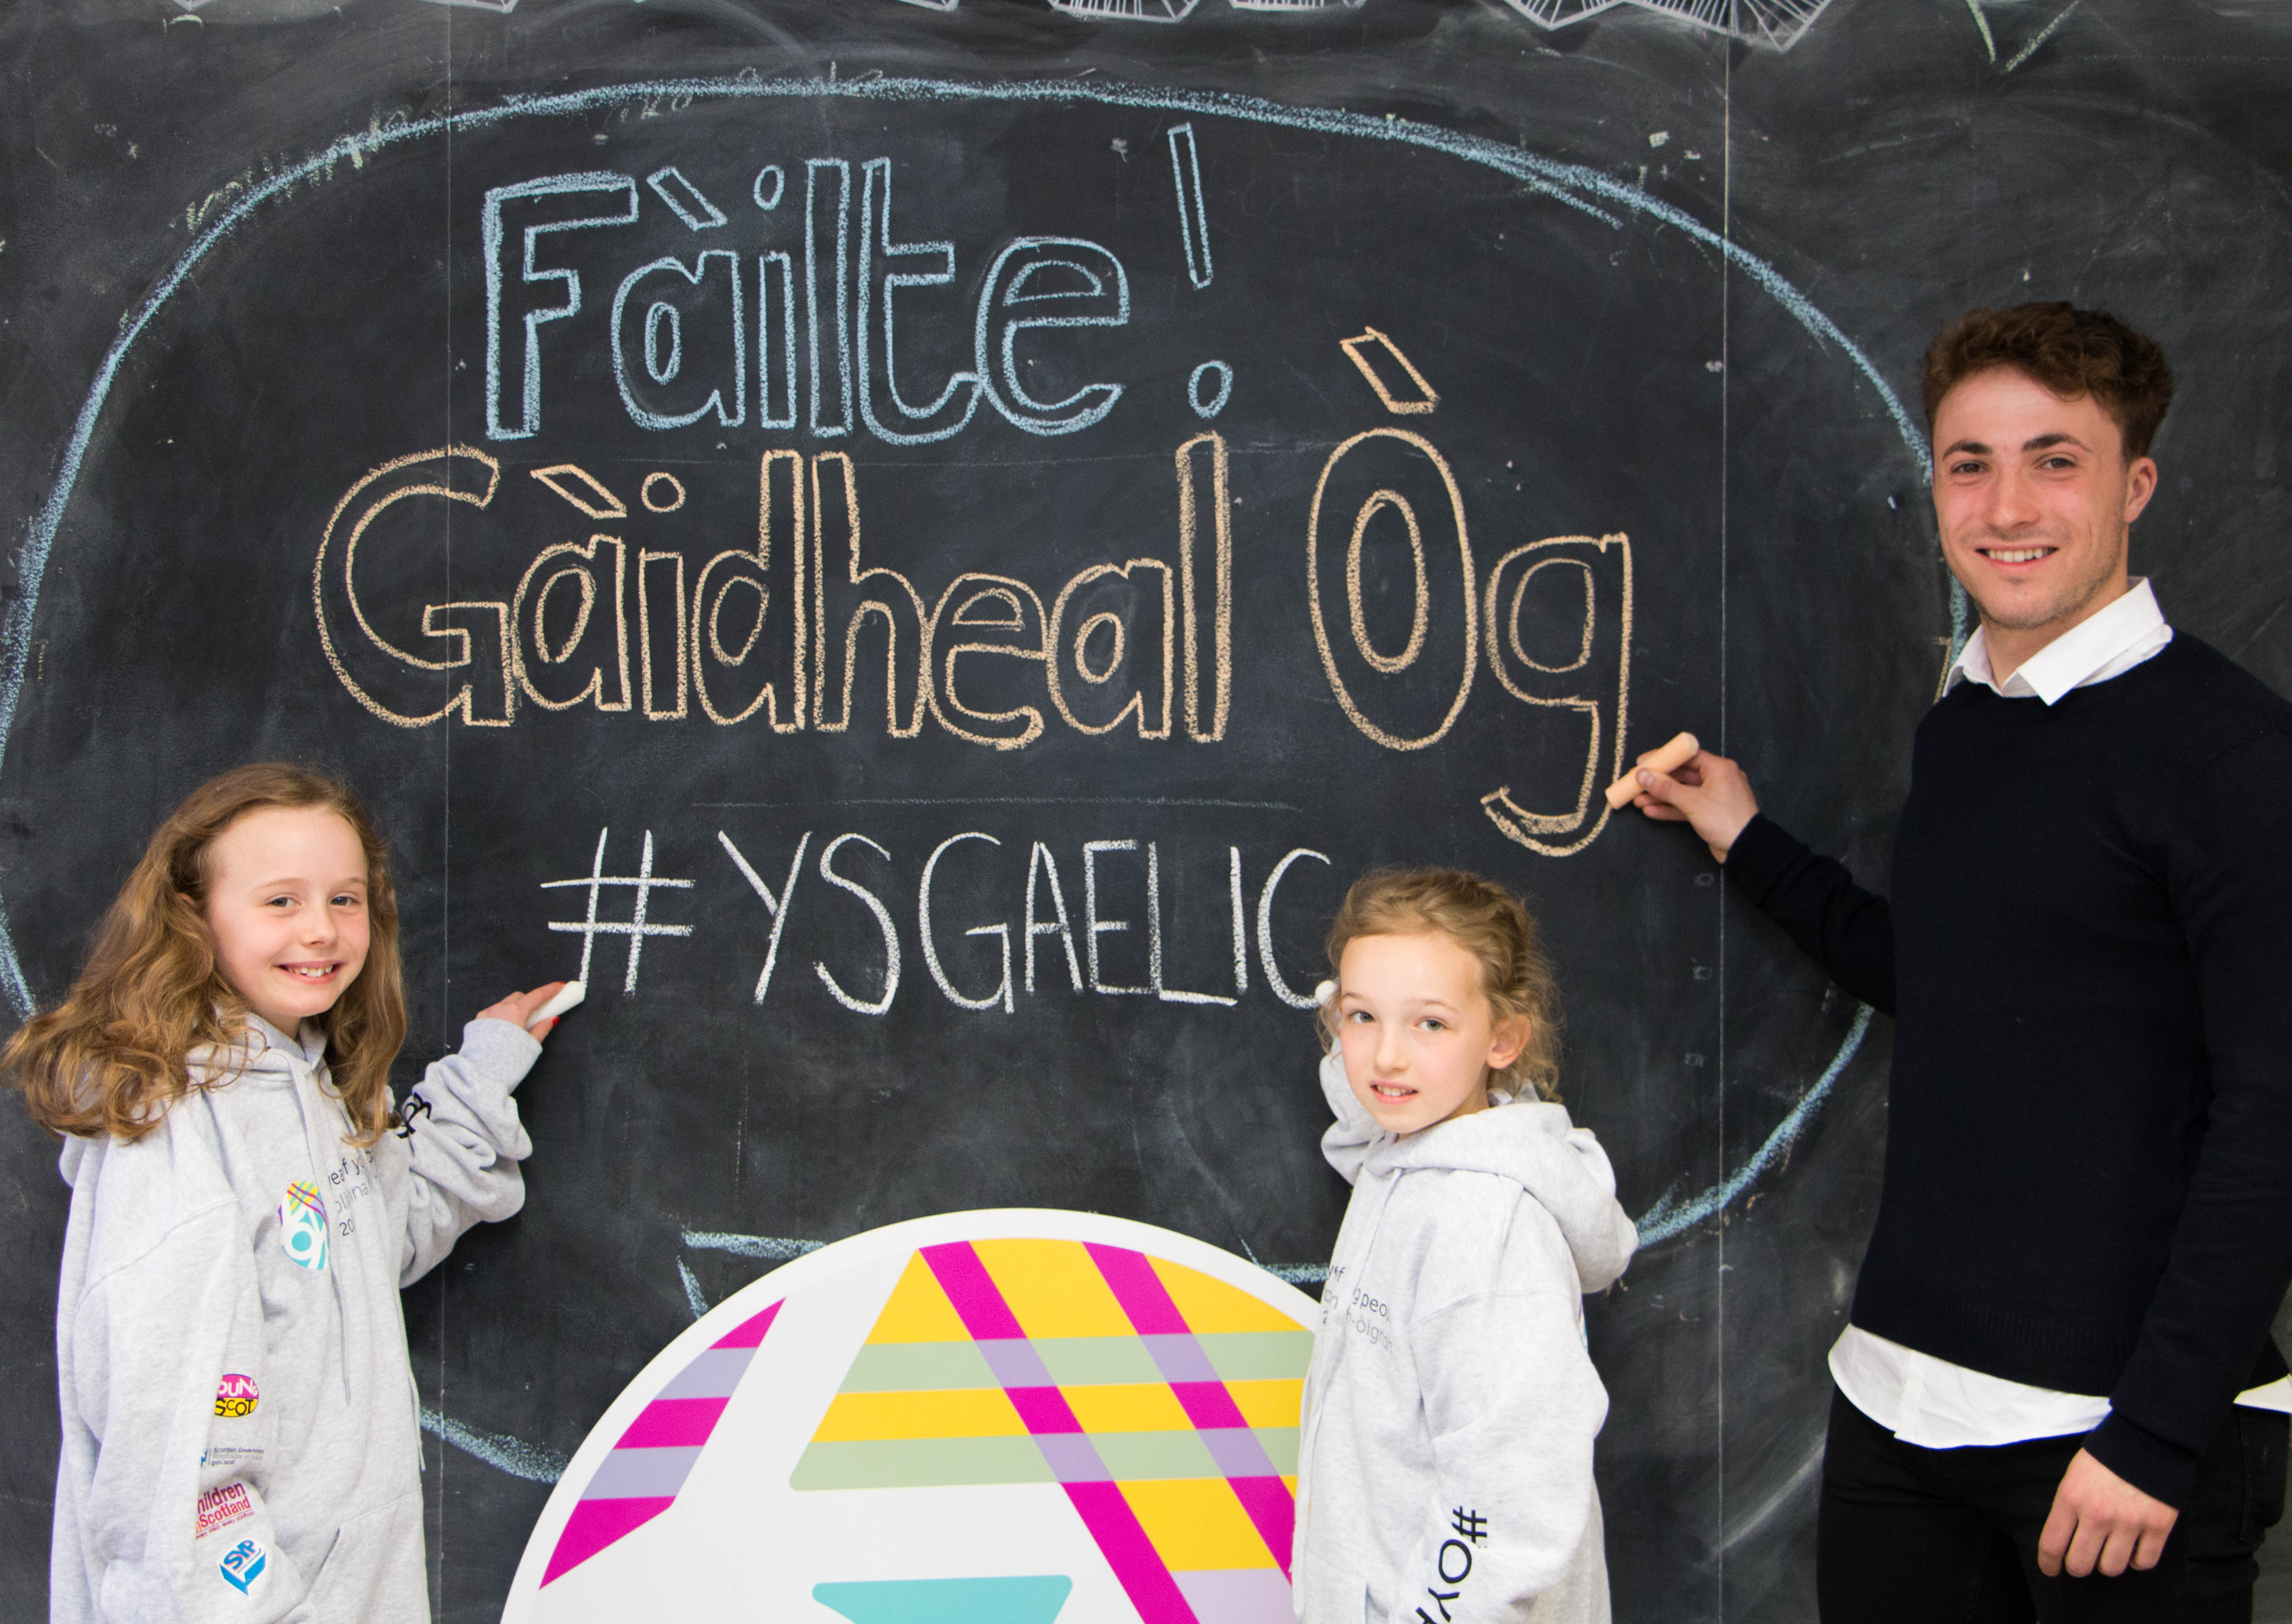 Picture: The three school children holding chalk and writing  "Fàilte! Gàidheal Òg! #YSGaelic "Welcome! Young geals" on the black chalkboard